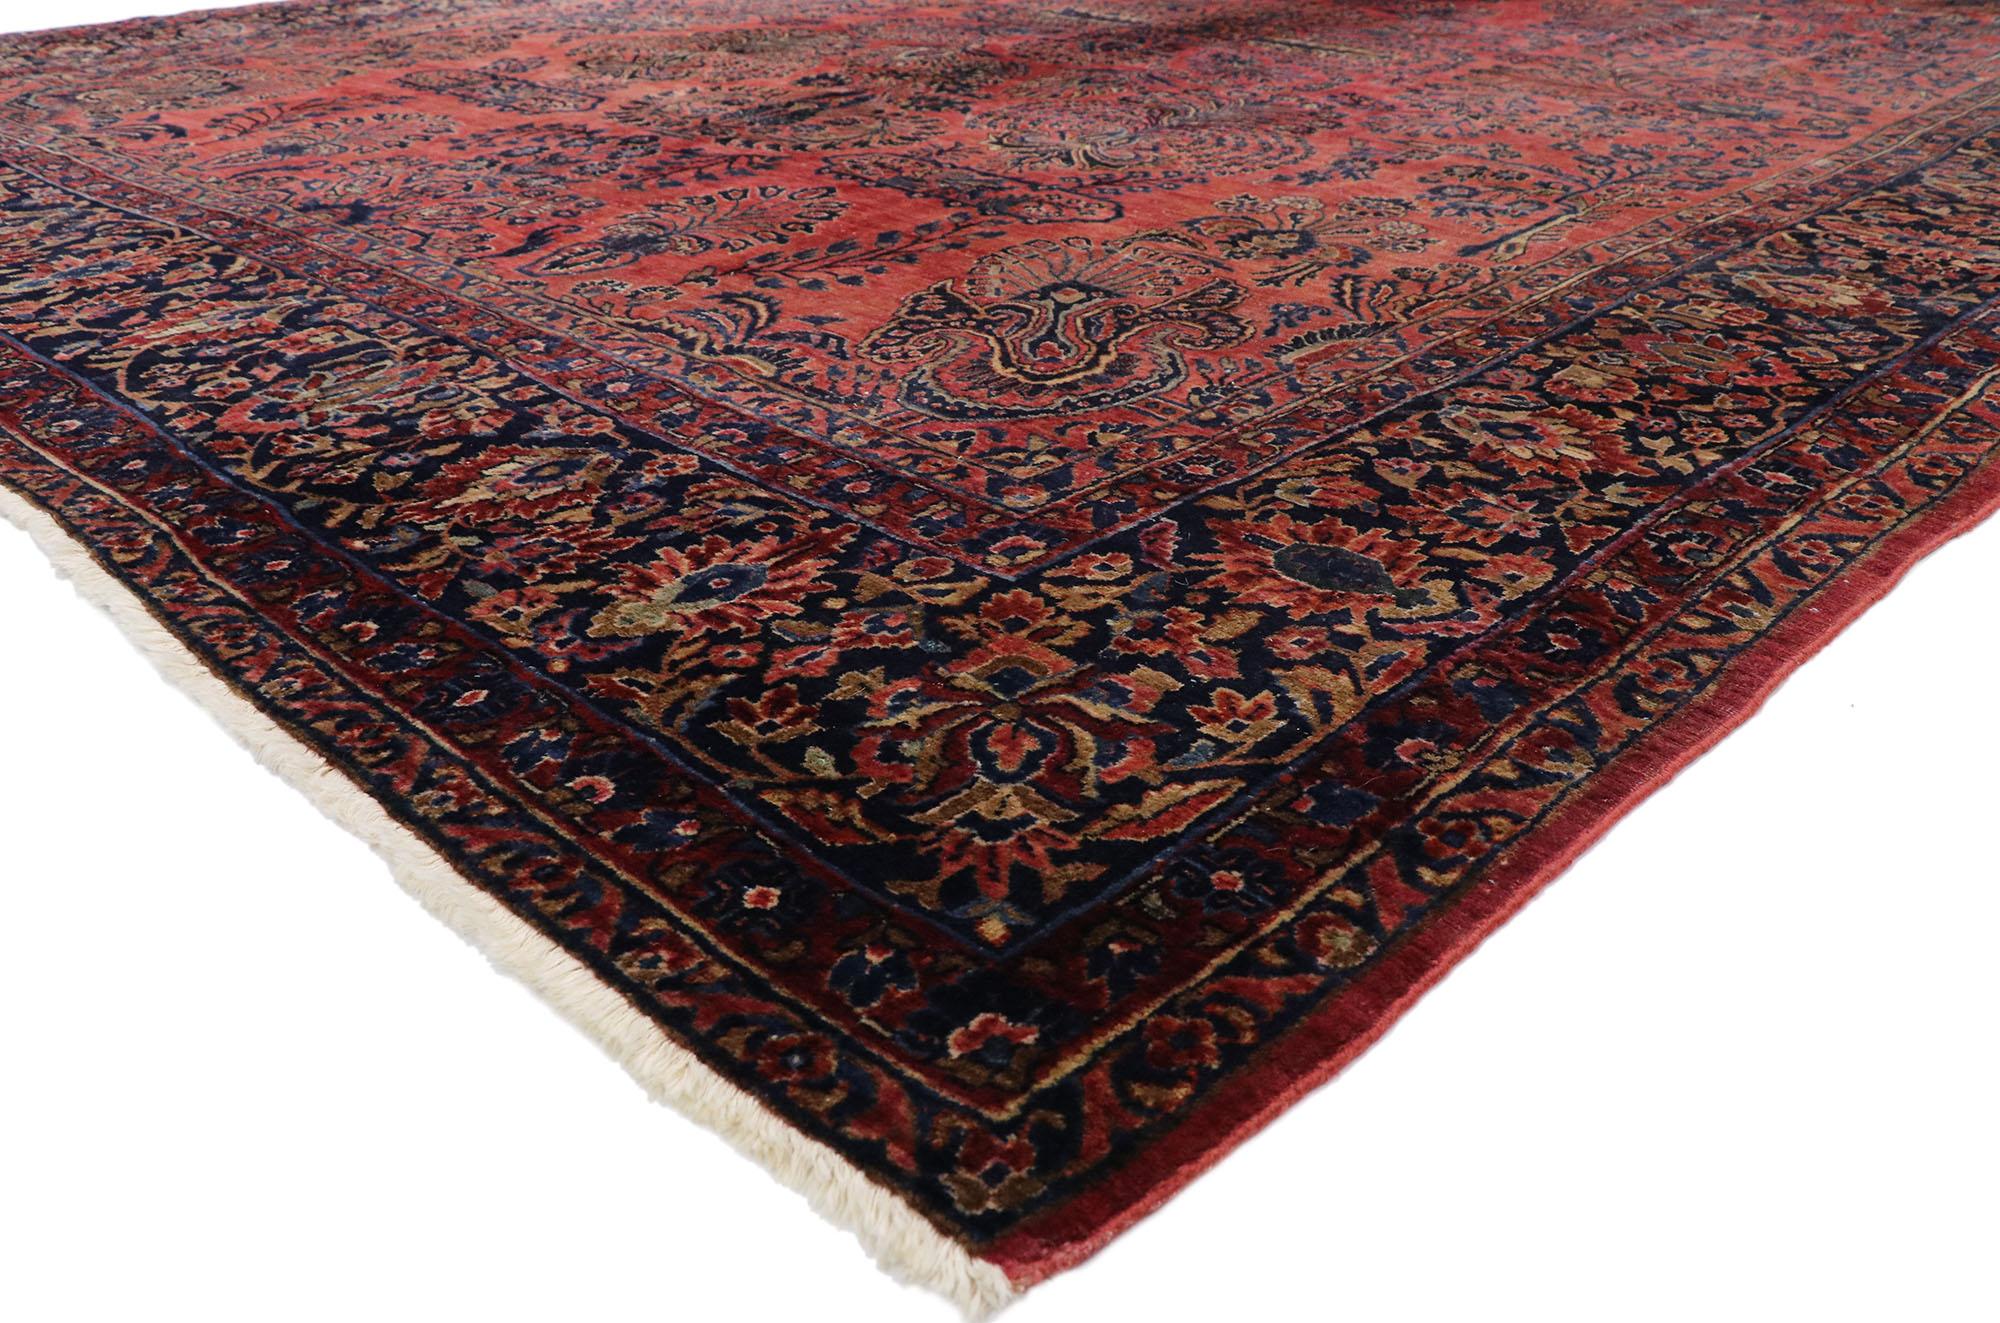 77387, distressed antique Persian Sarouk Area rug with Modern English Tudor style. Rich colors yet lovingly timeworn with beguiling ambiance, this hand knotted wool distressed antique Persian Sarouk area rug beautifully highlights modern English